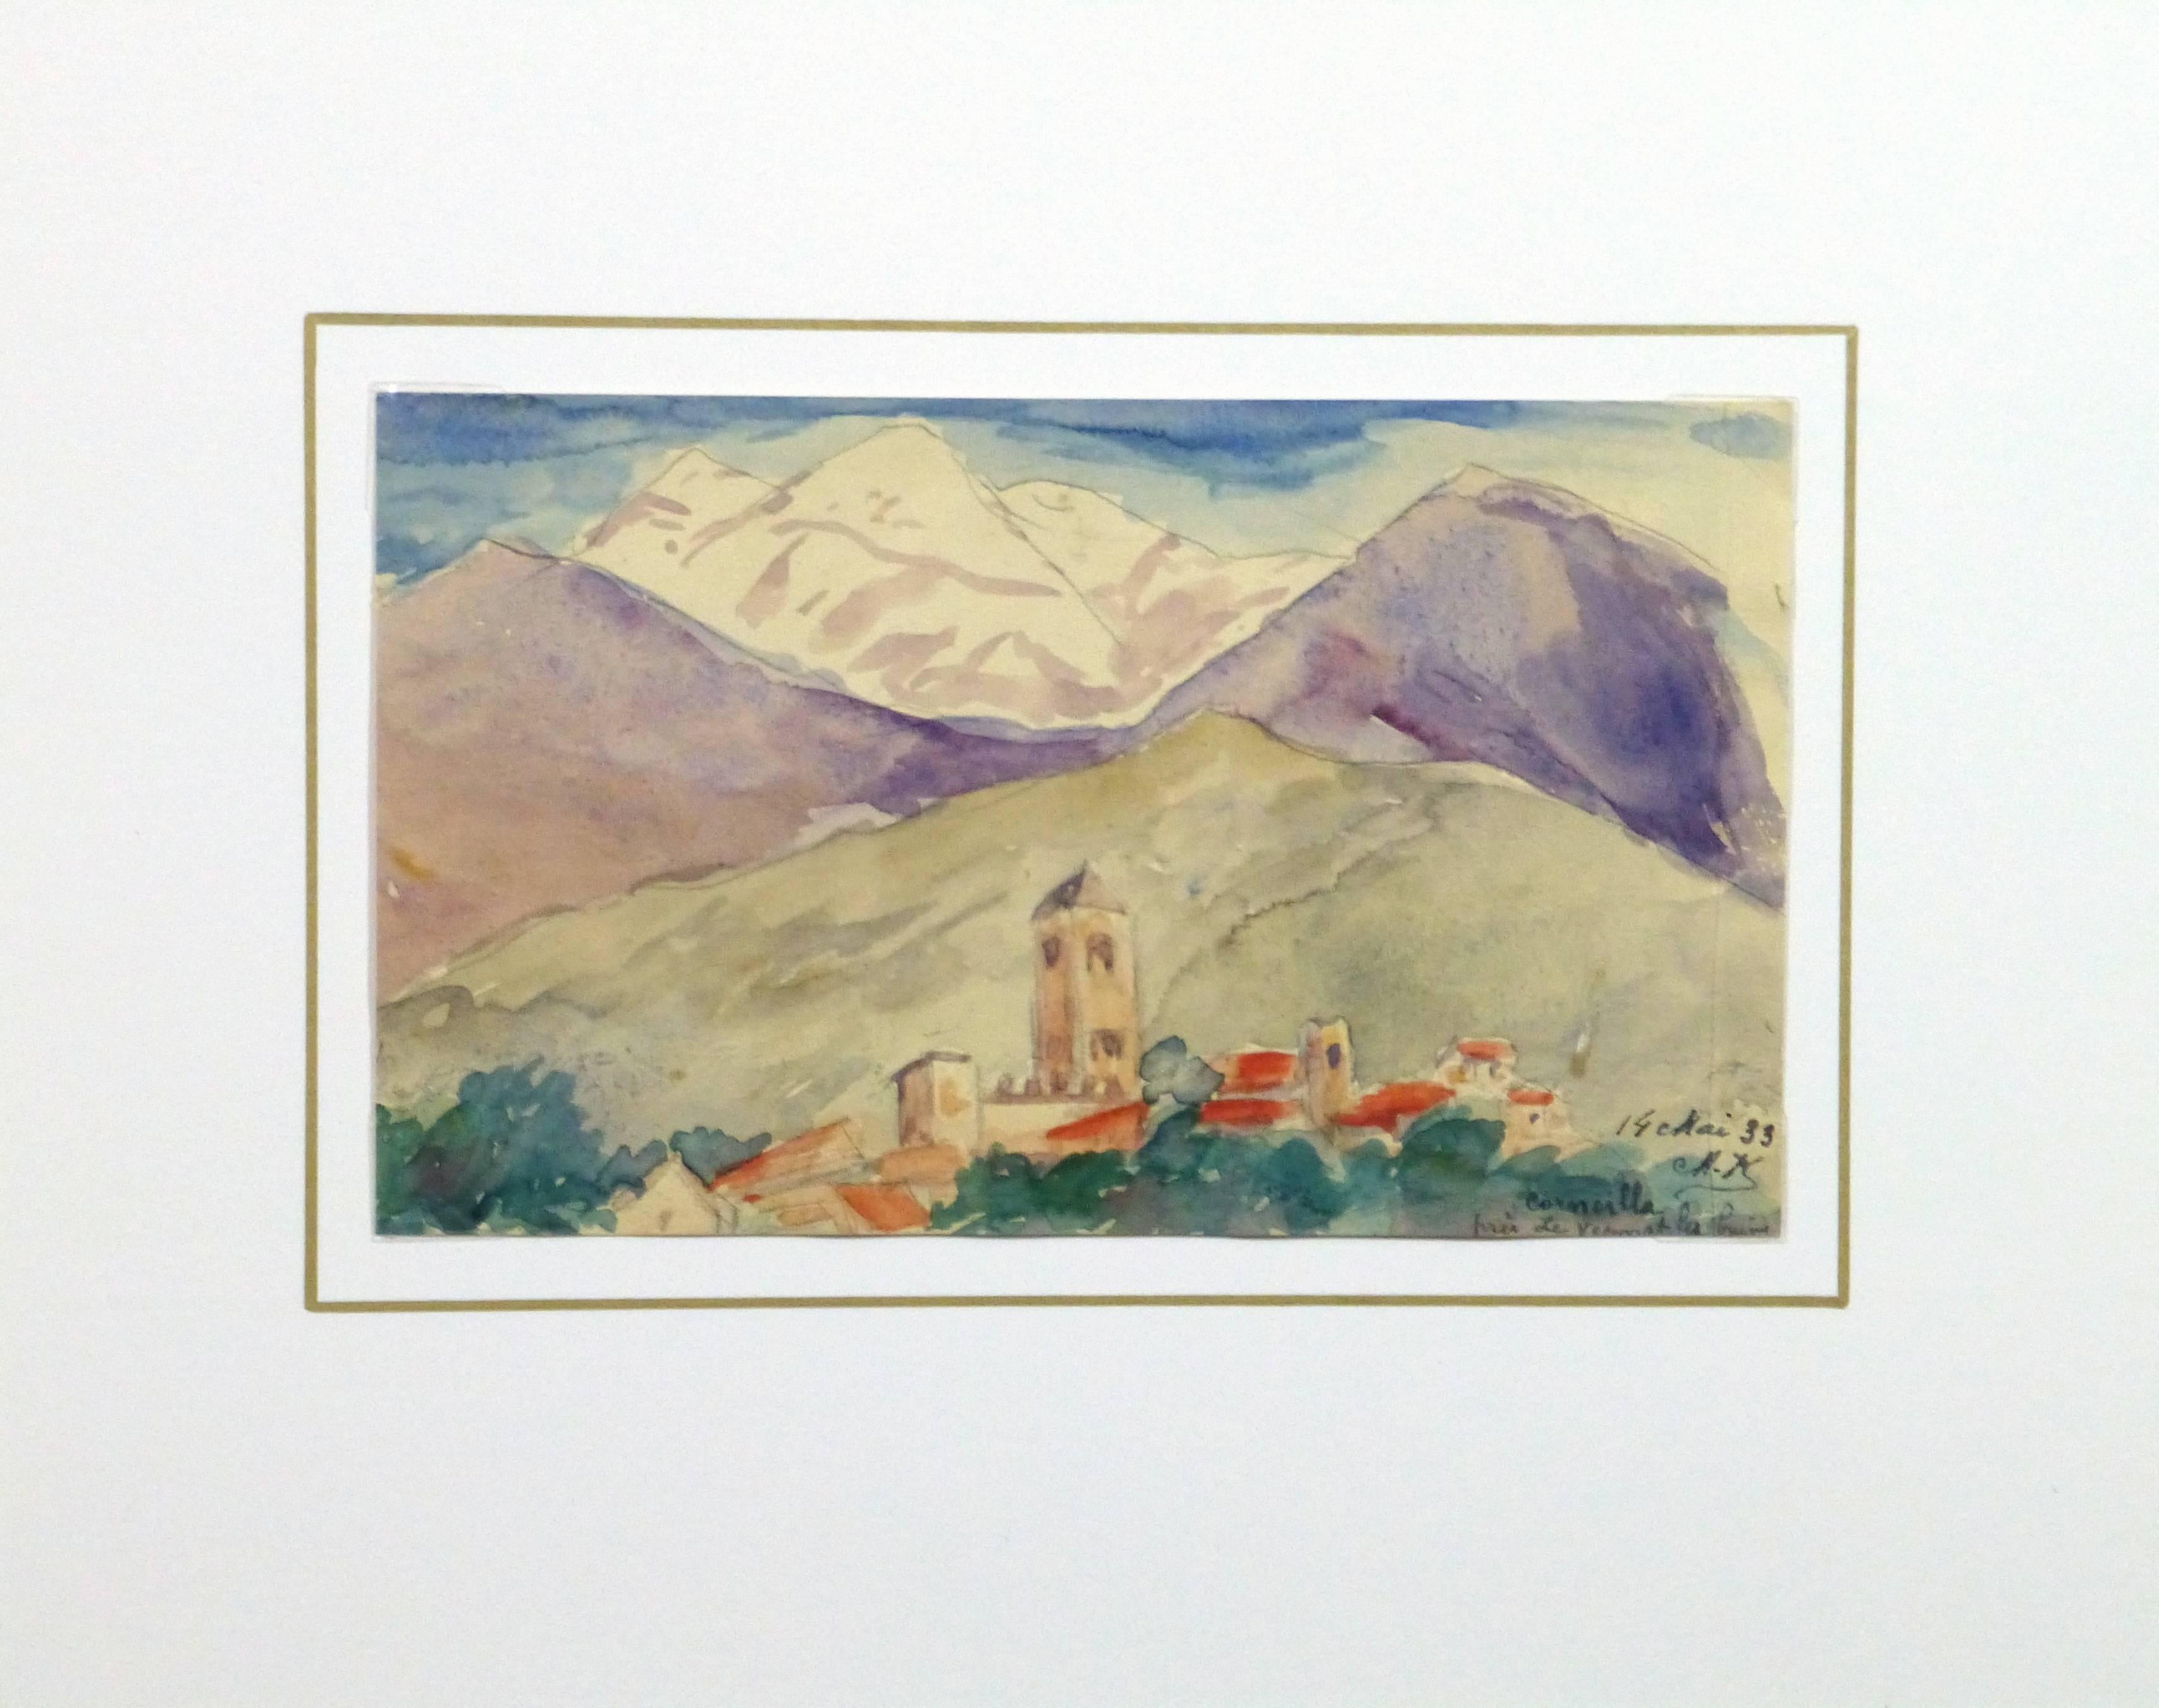 Vintage French watercolor is a colorful take on the small mountainside town of Cornélia, located in the western Pyrenees by M. Kesseler, 1933. Signed, titled and dated lower right.

Original one-of-a-kind artwork on paper displayed on a white mat